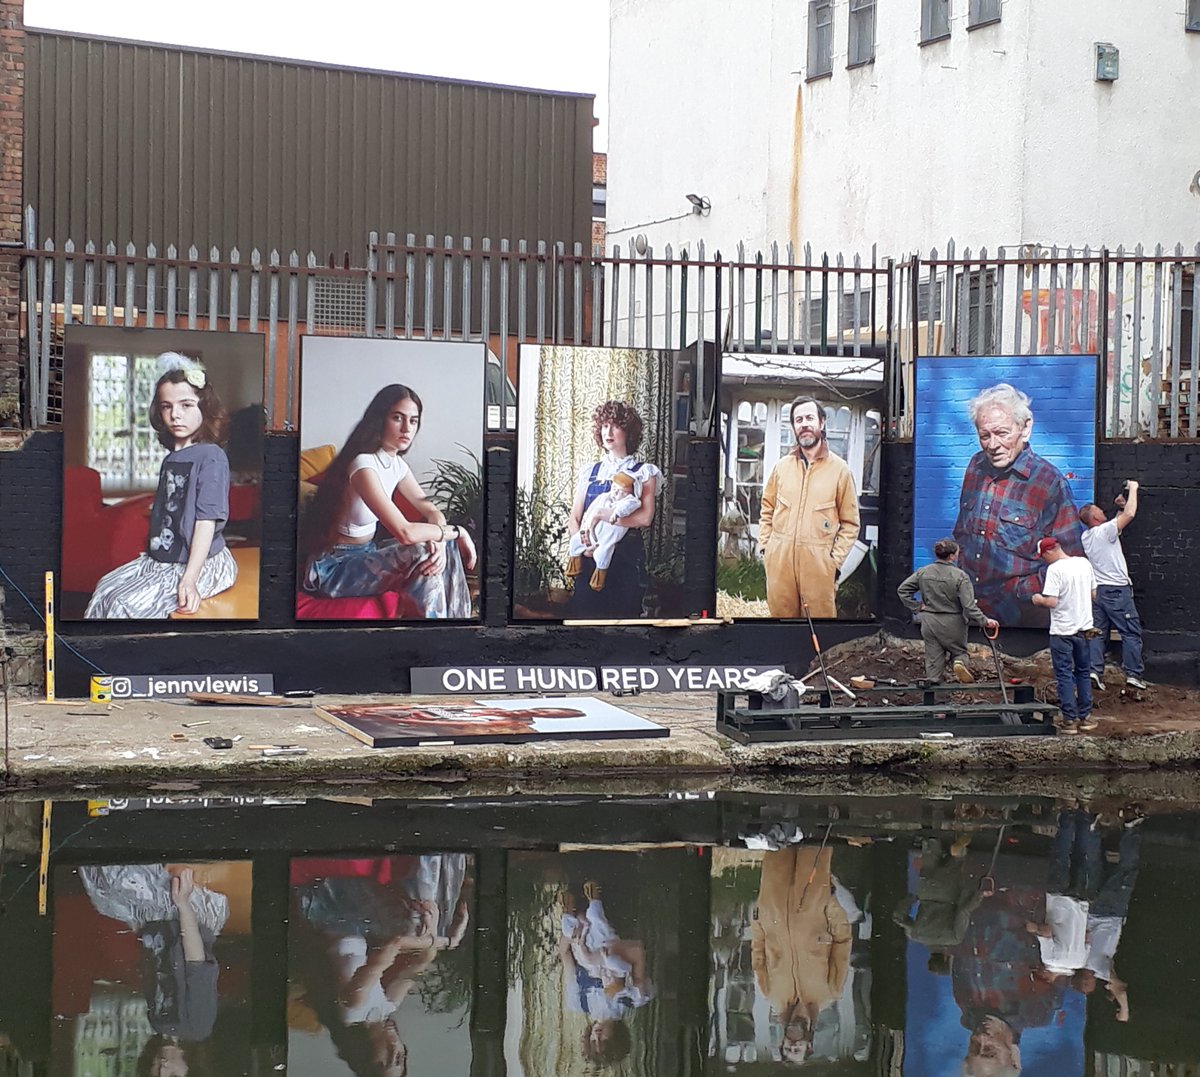 Photos by Jenny Lewis, who was a great guest, this morning on the #robertelms show, being installed next to the Regent's Canal. https://t.co/aSn8JAczb1